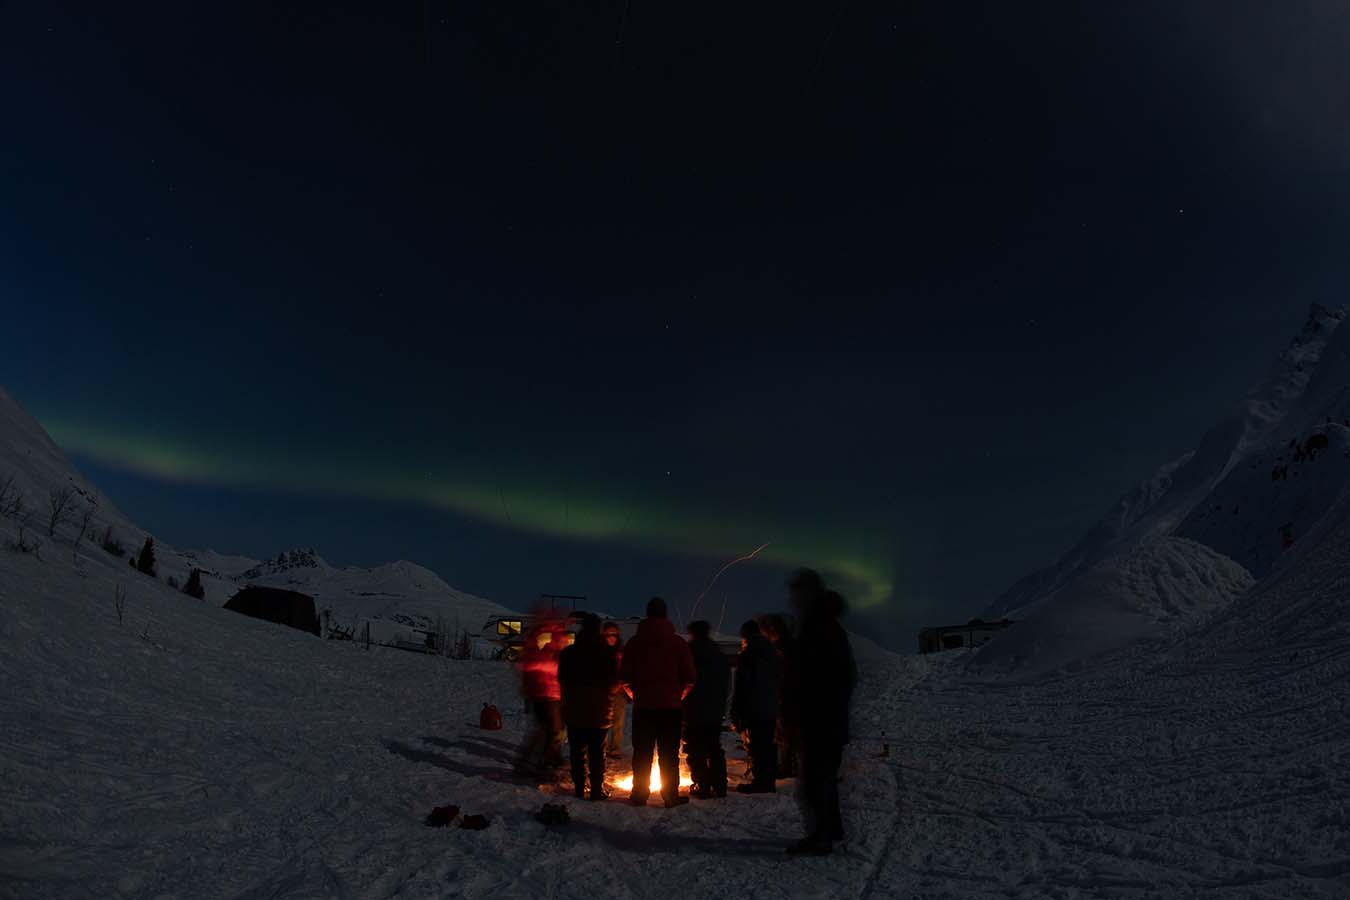 The group gathered around a camp fire, aurora borealis visible in the night sky